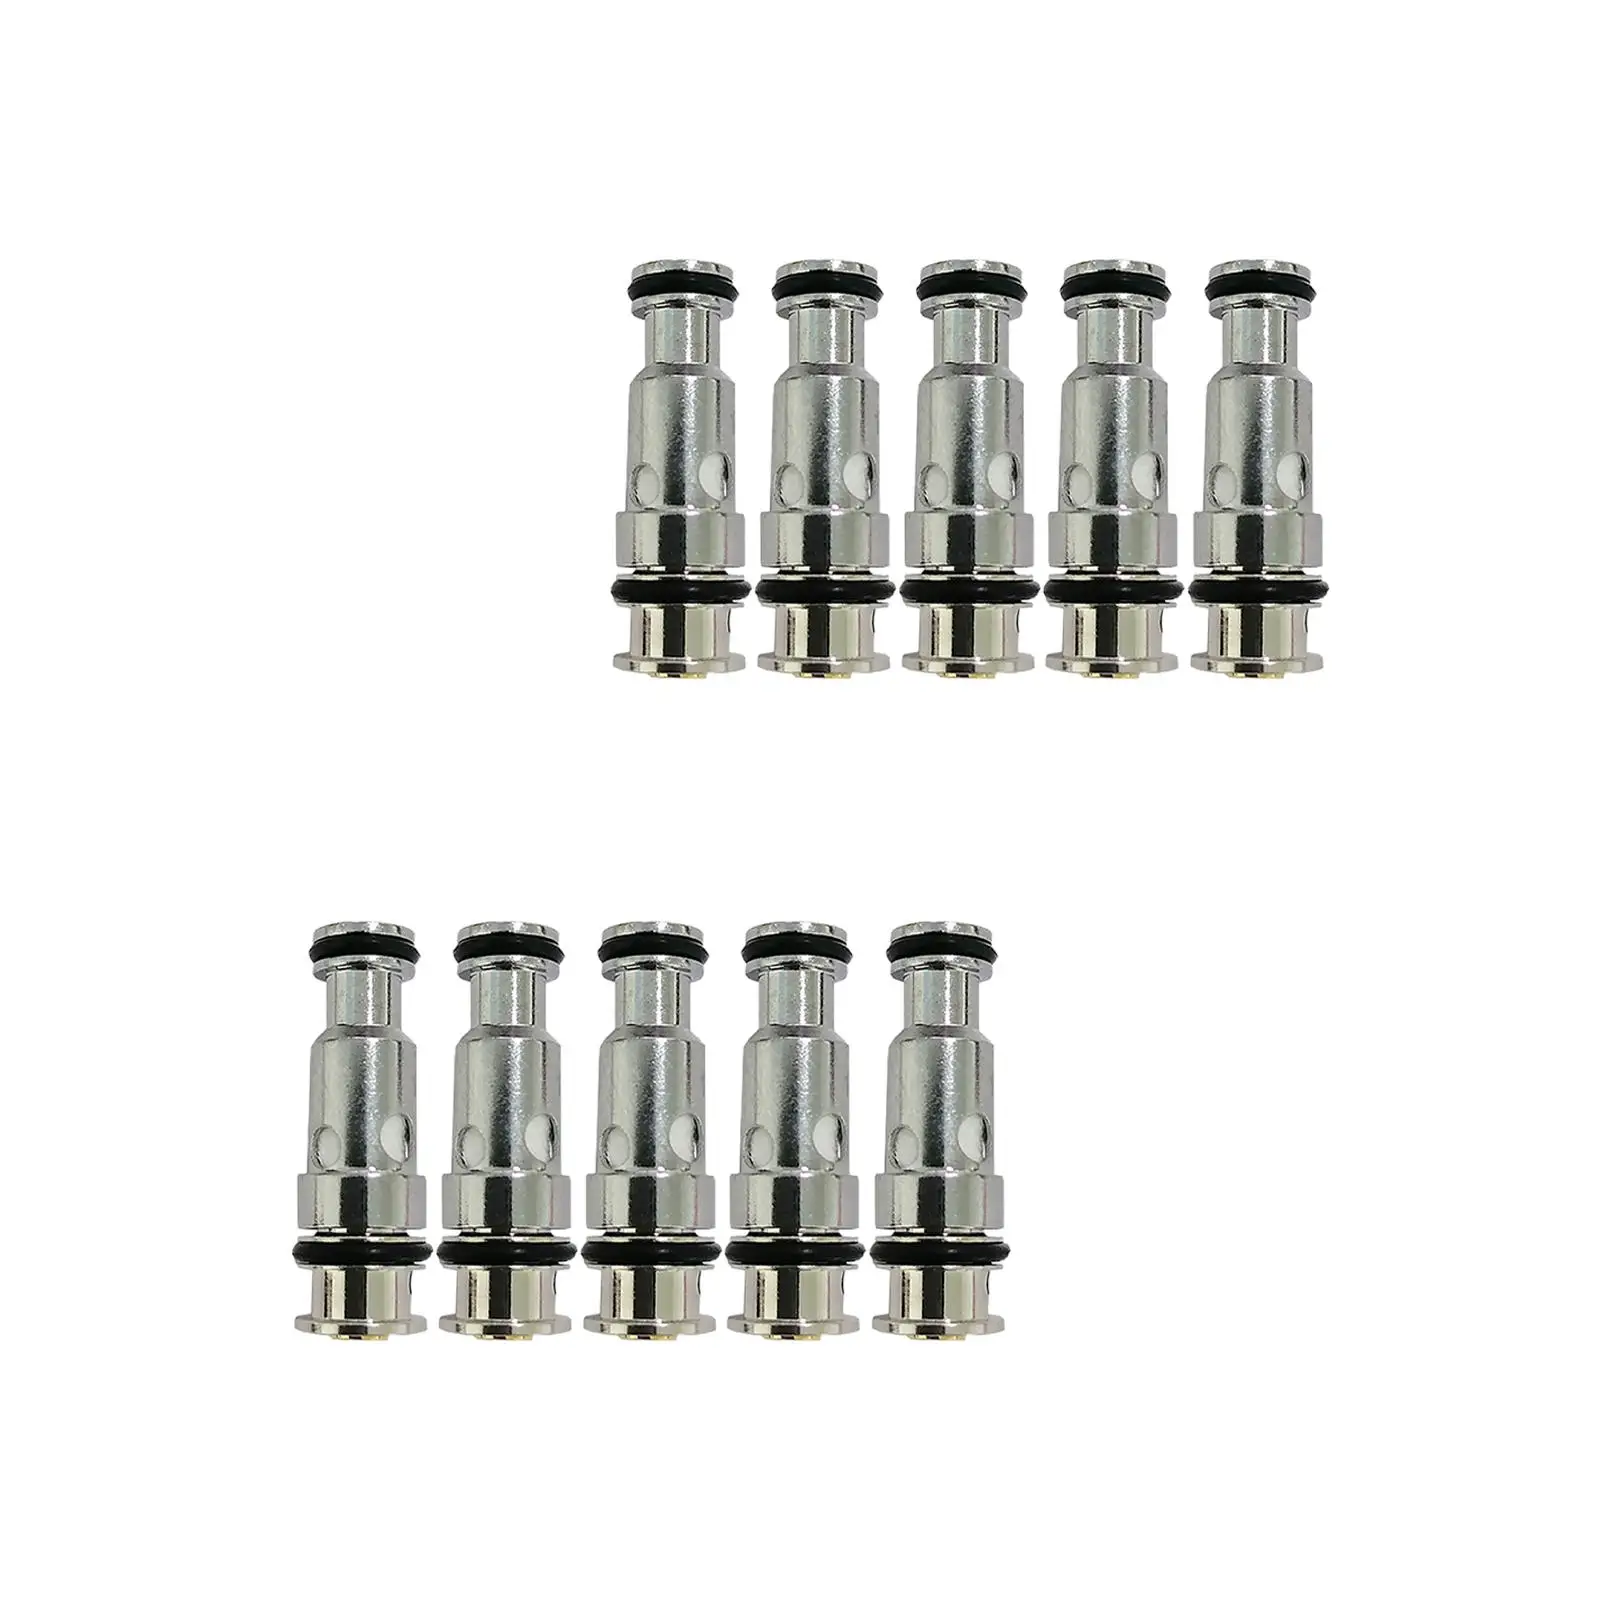 5Pcs PNP Coils Head Easy Use Plug in Play Stainless Steel Durable for Argus Air 857 Accessories Parts